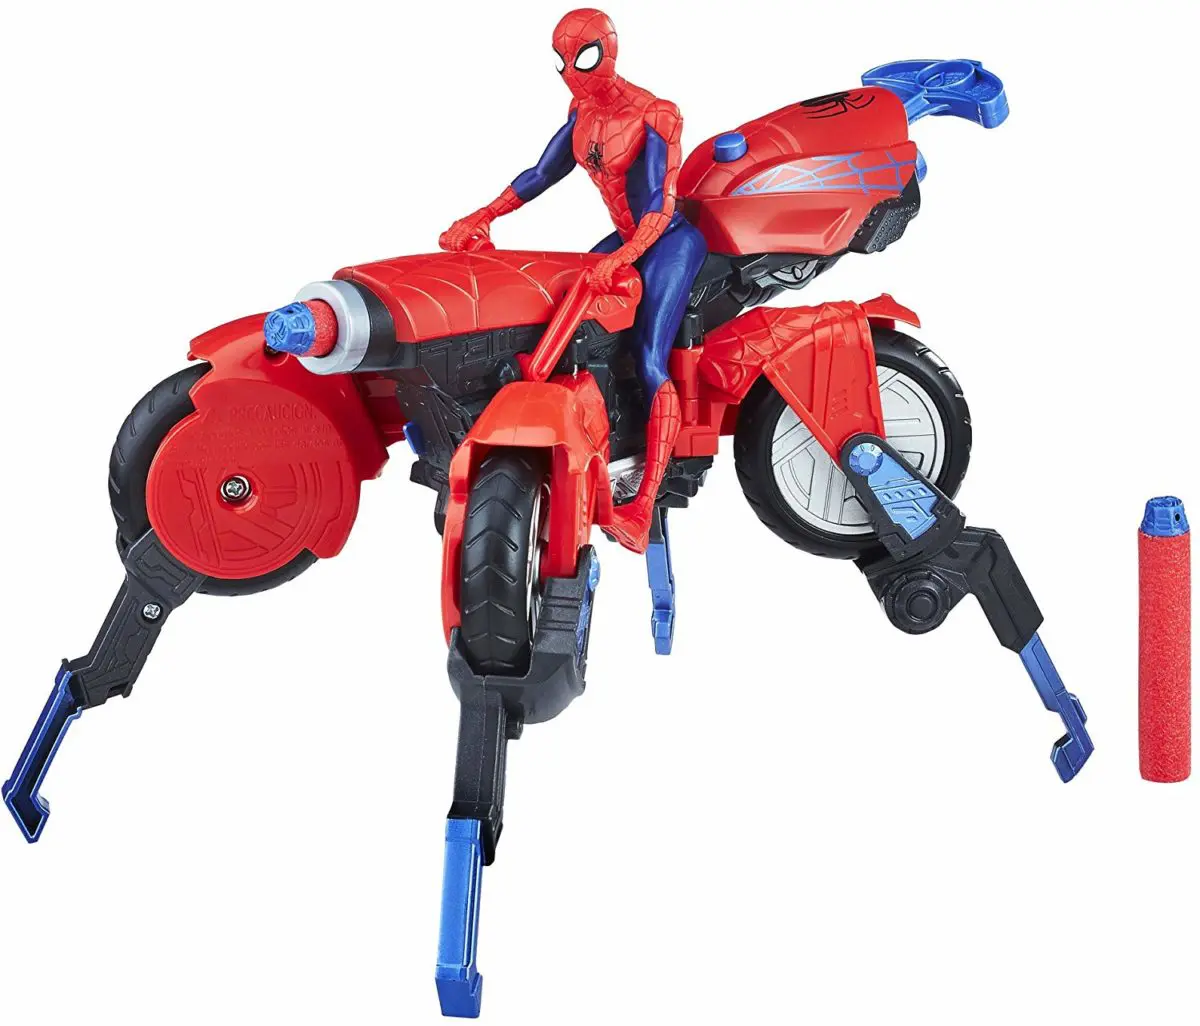 Marvel Spider-Man 3-in-1 Spider Cycle with Spider-Man Figure - Top Toys and Gifts for Six Year Old Boys 1